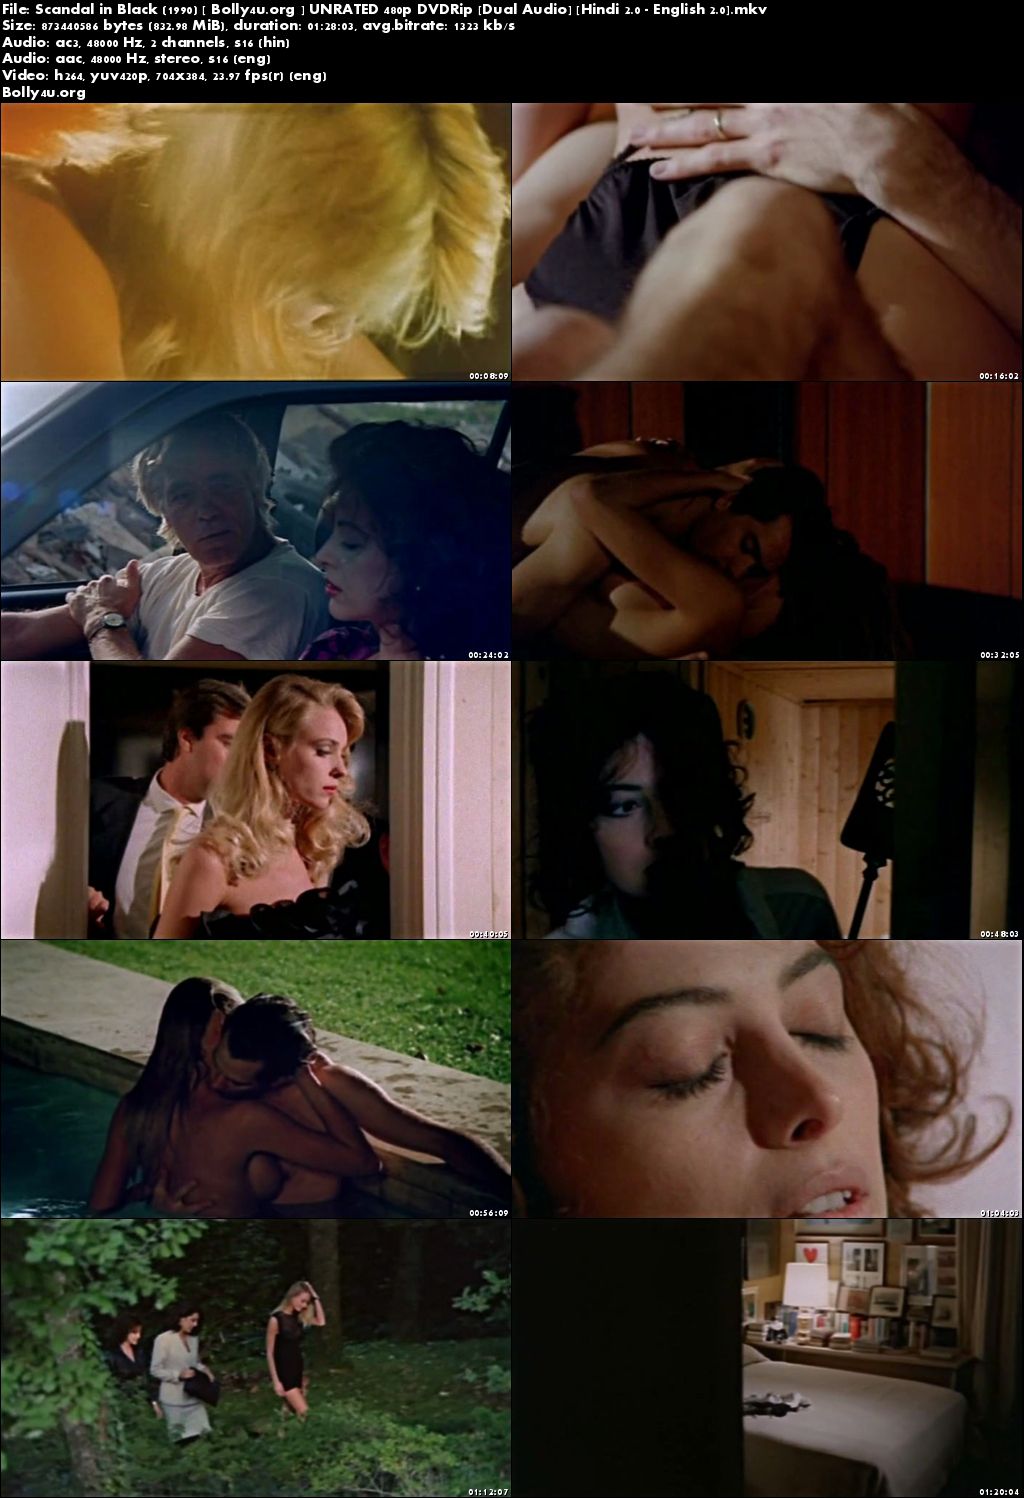 [18+] Scandal in Black 1990 DVDRip 480p Hindi UNRATED Dual Audio 280MB Download